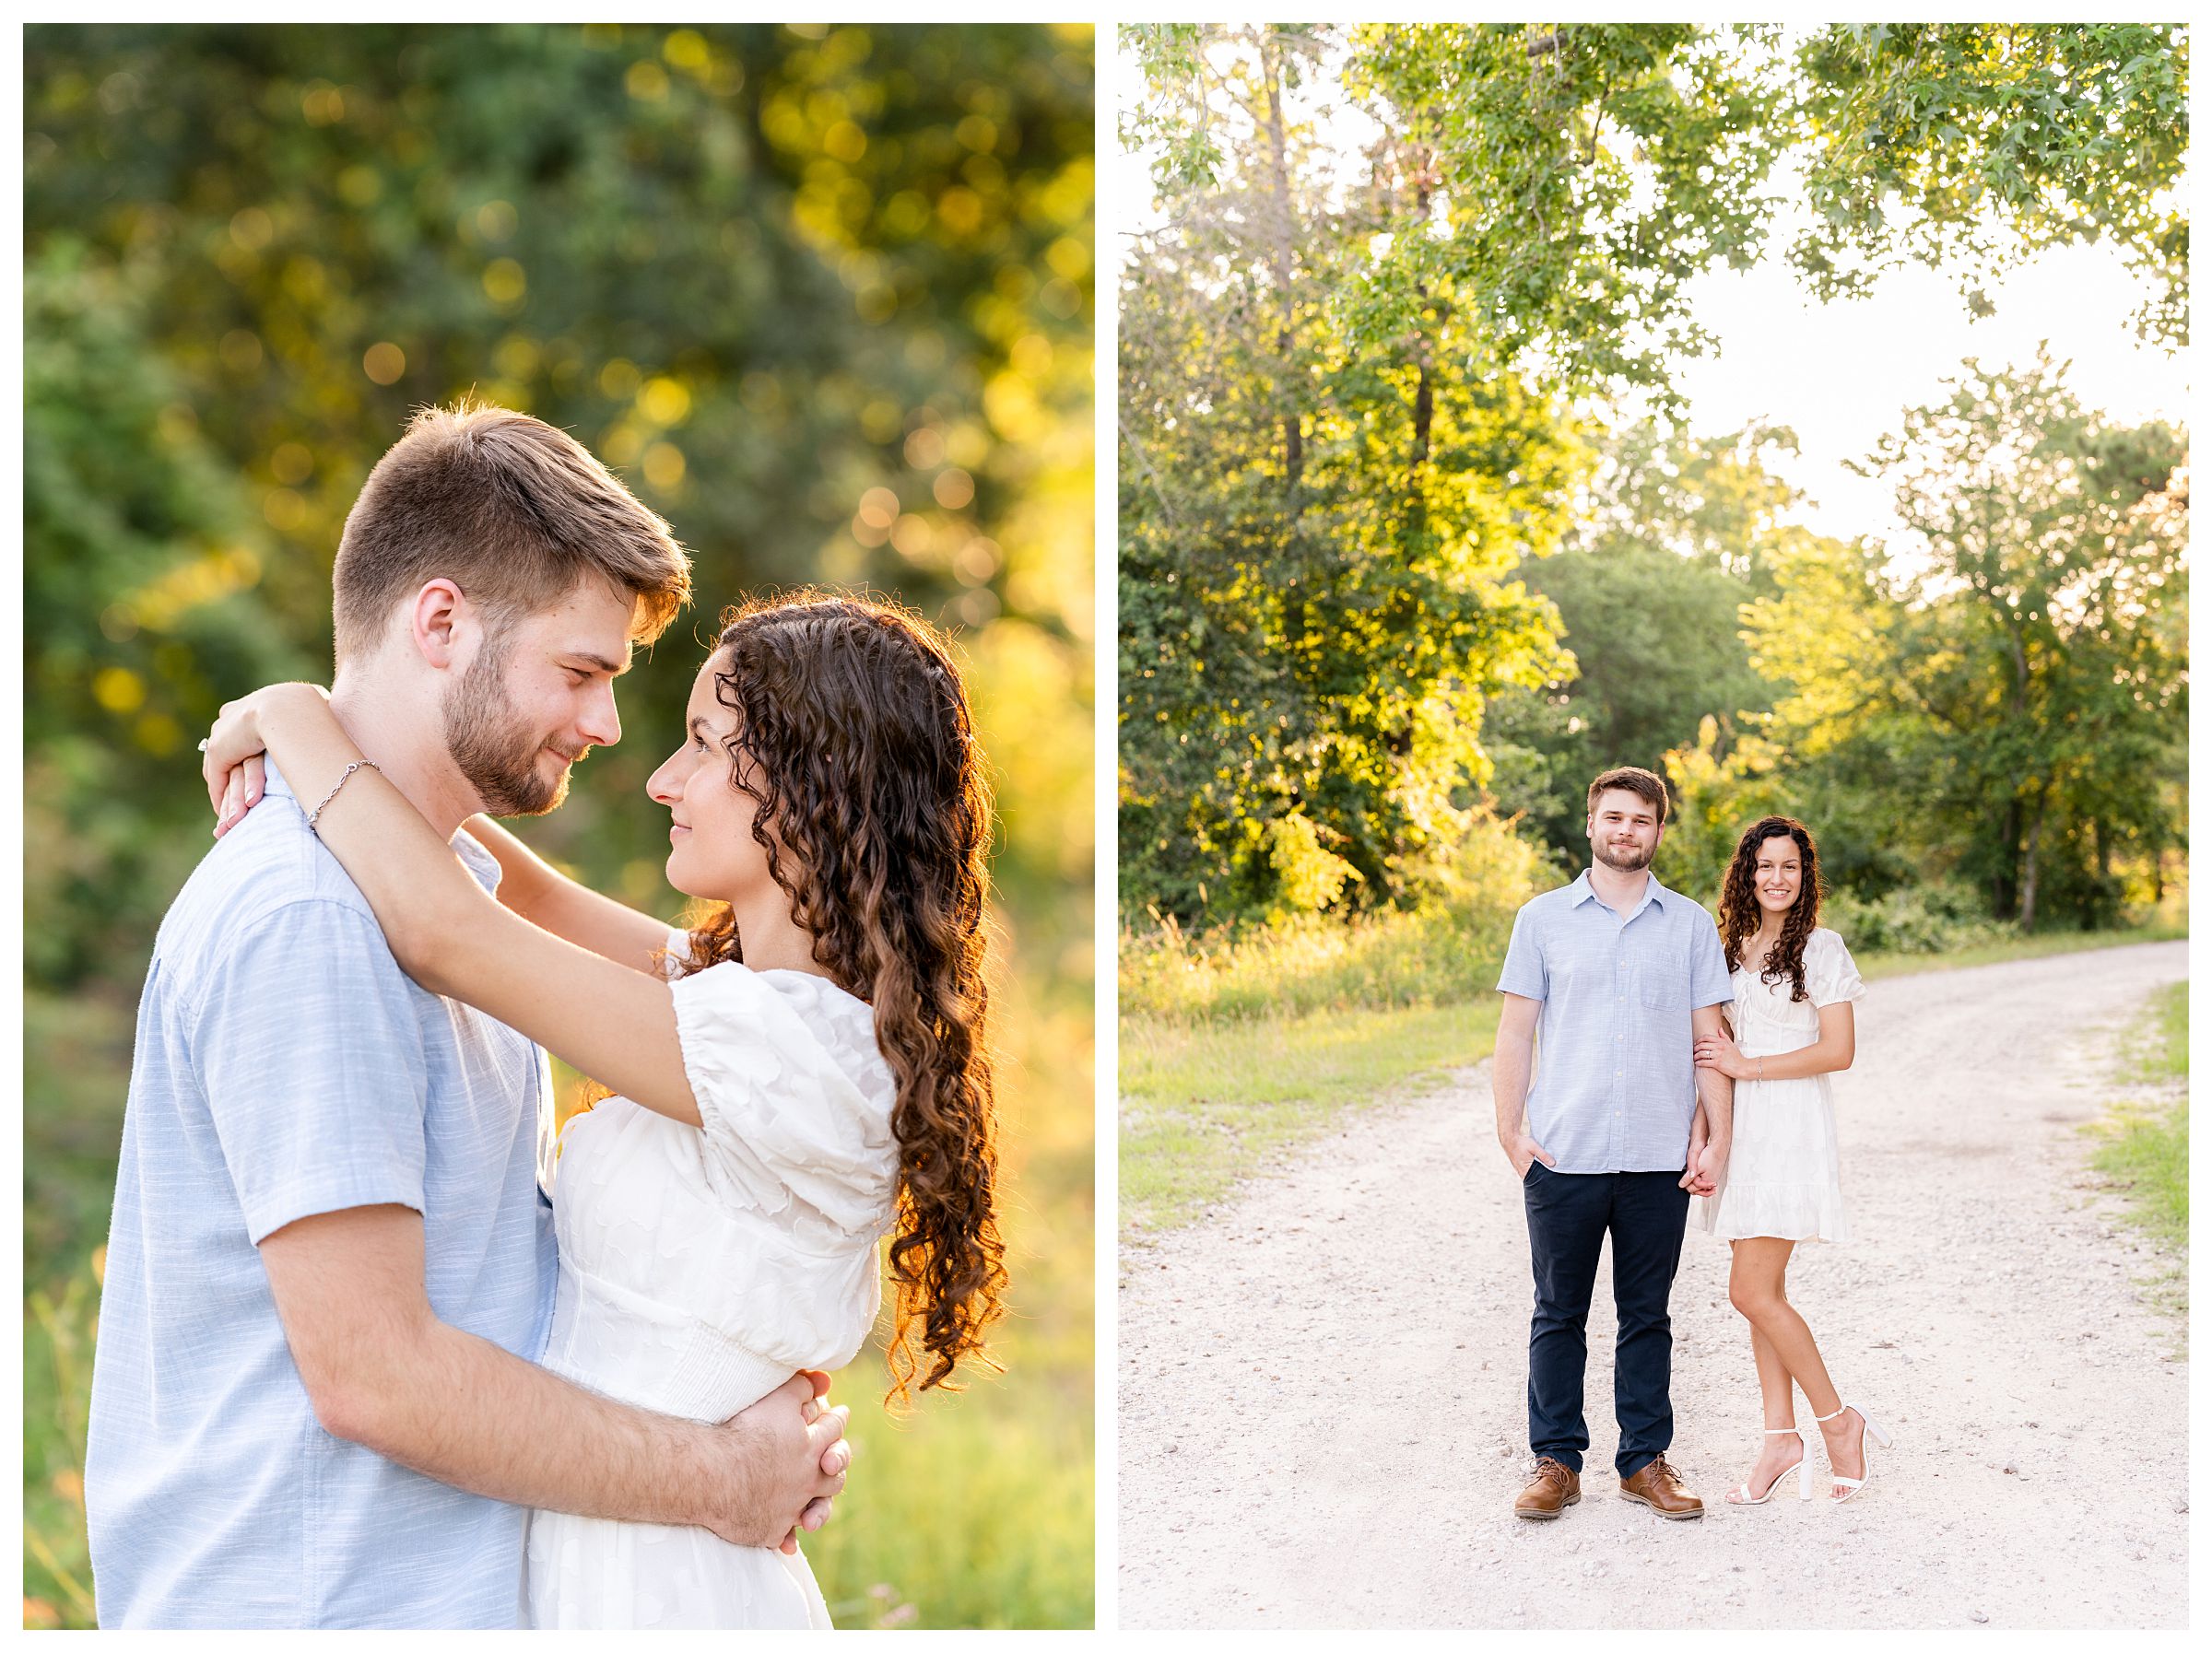 Sunset dressy couple's engagement session in nature at Cy-Hope in Cypress, Texas outside of Houston by Mary Beth Photography